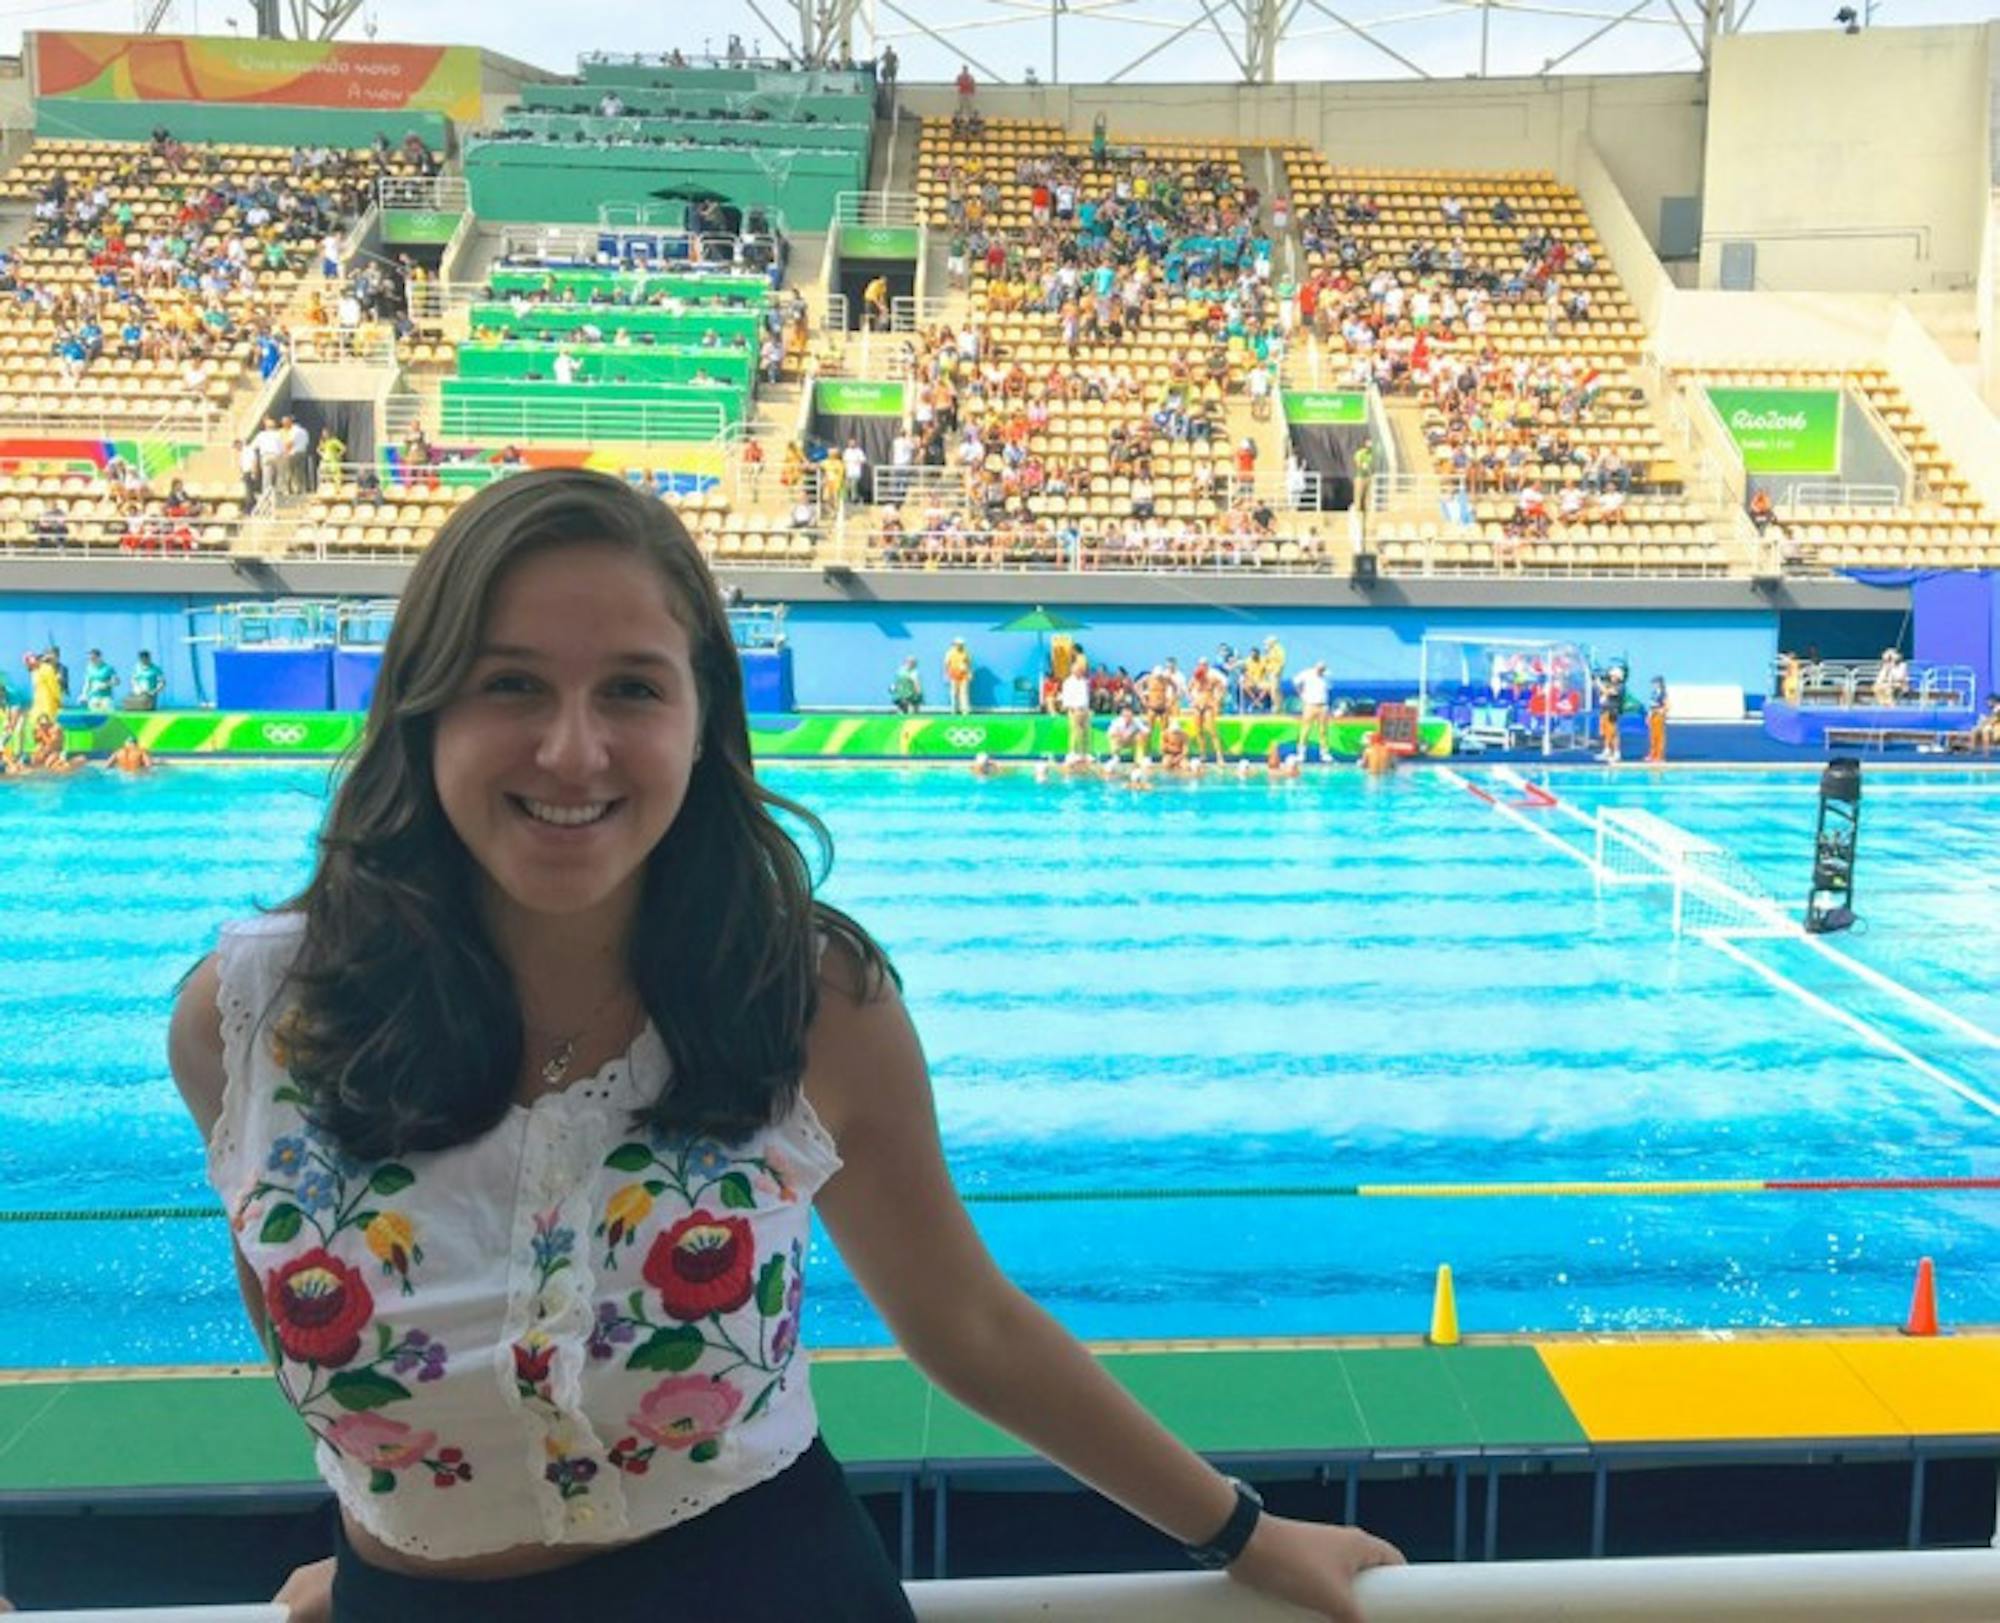 Senior Noemi Ventilla at the Olympic Aquatics Stadium before a water polo match during the 2016 Olympic Games.